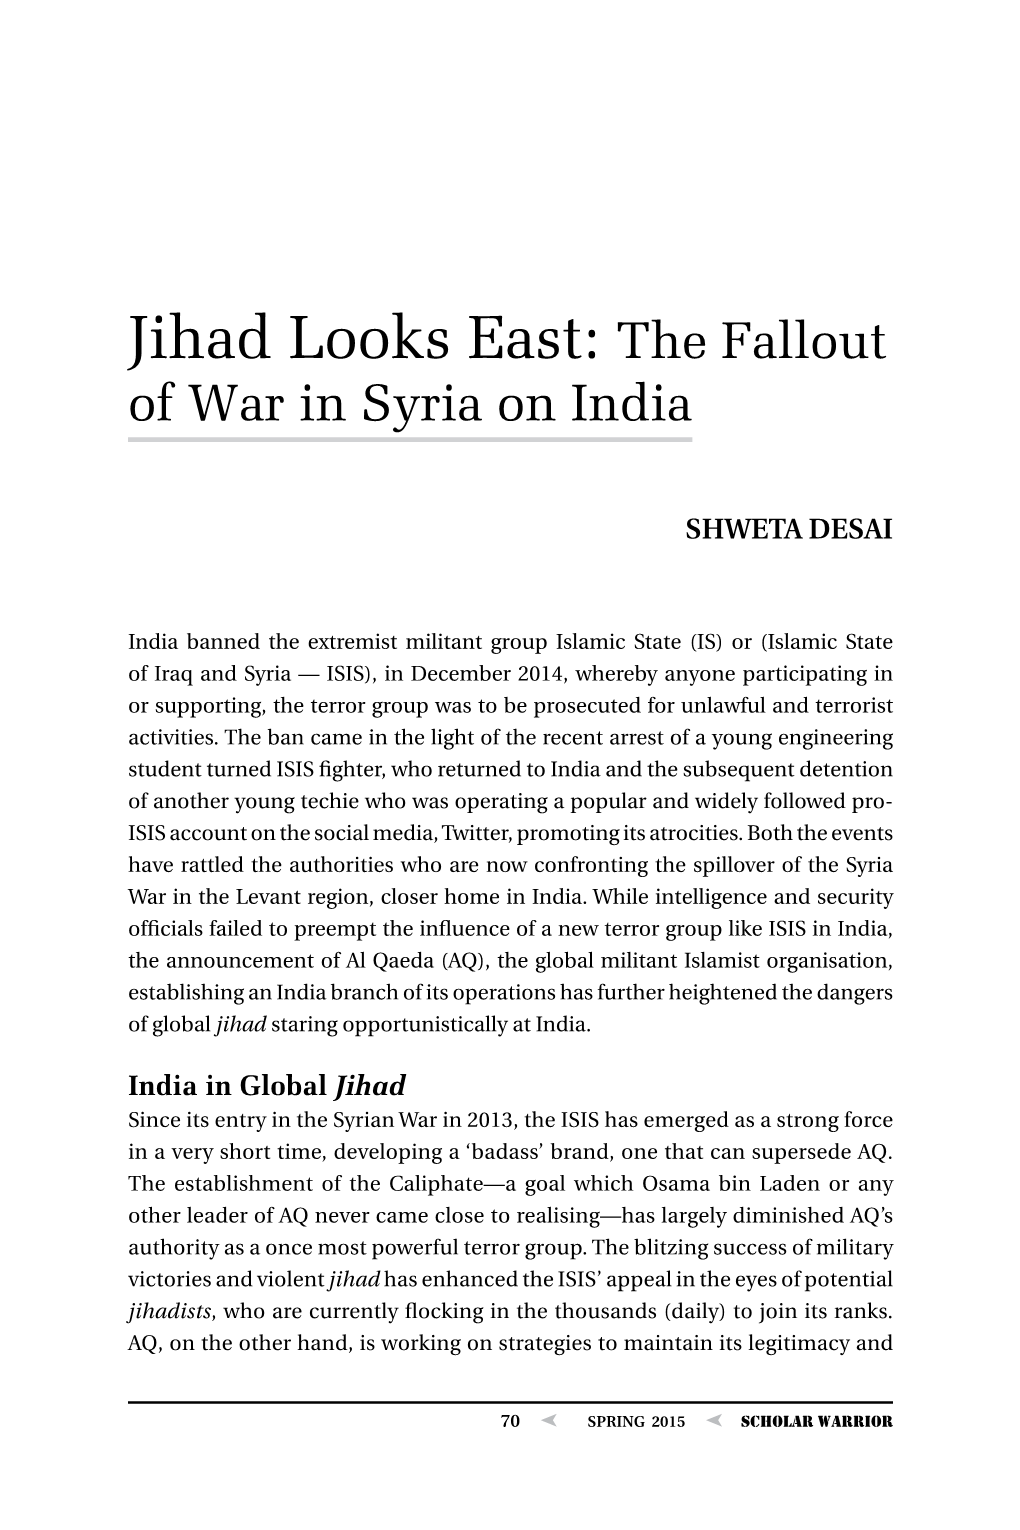 Jihad Looks East: the Fallout of War in Syria on India, By